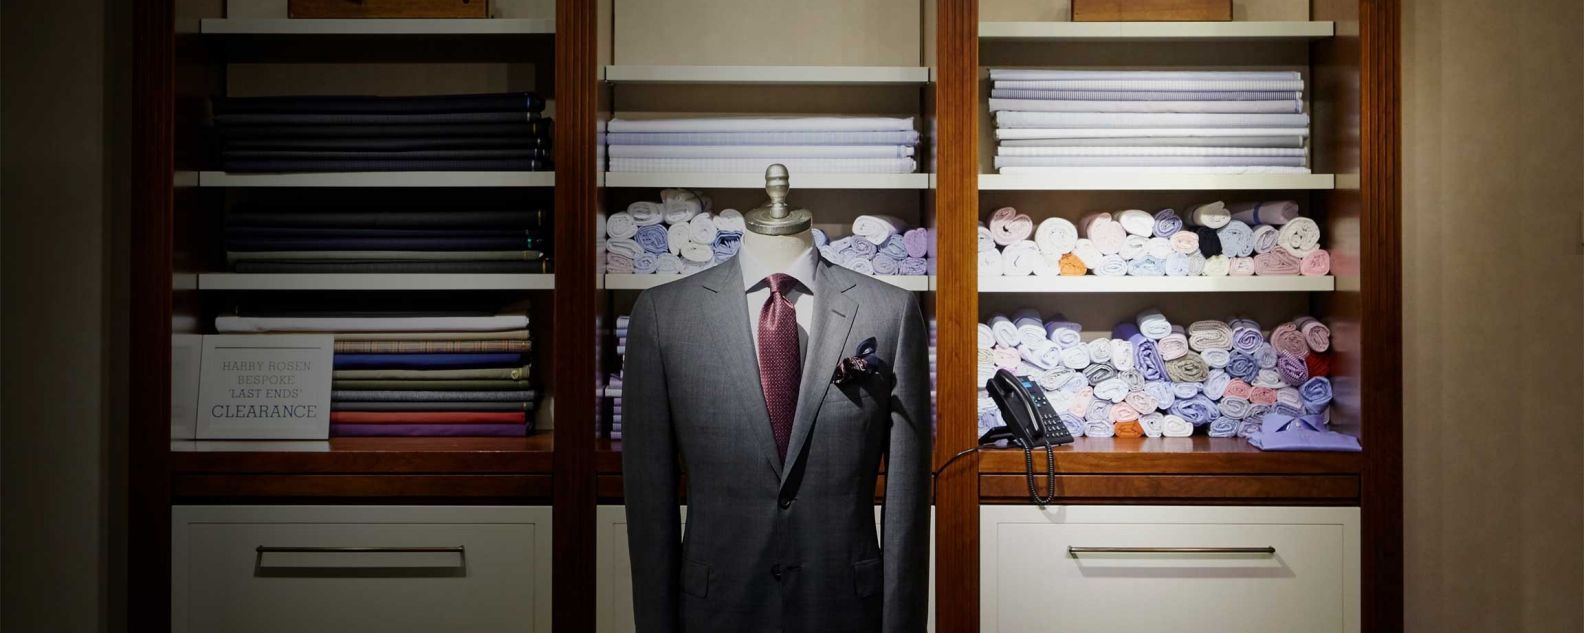 A tailor shop showing a dress suit on a mannequin and shirt fabrics on shelves in the background